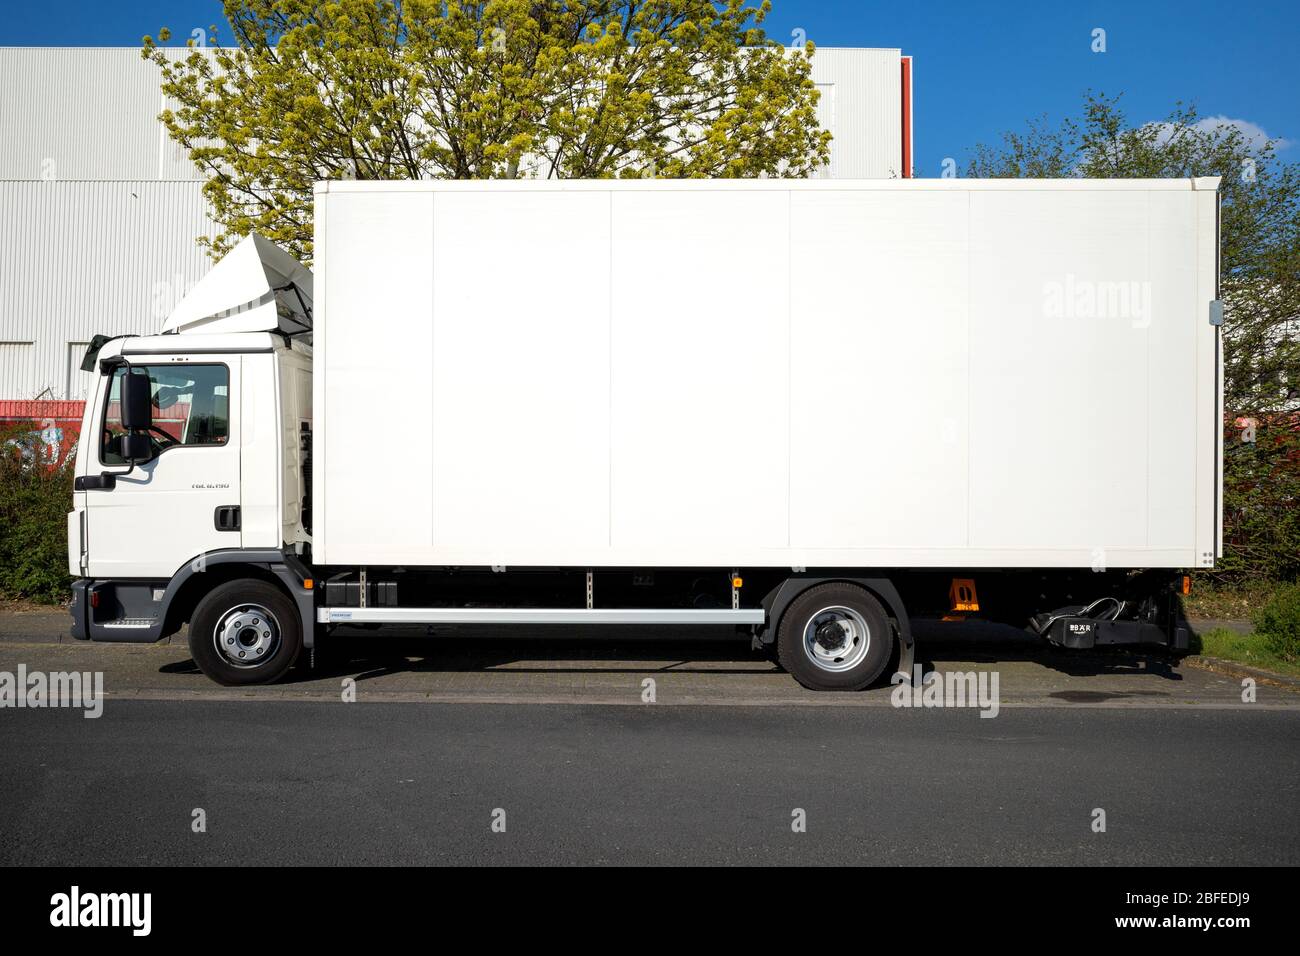 MAN TGL truck. The MAN TG-range is the range of trucks produced since 2000 by the German vehicle manufacturer MAN Truck & Bus. Stock Photo